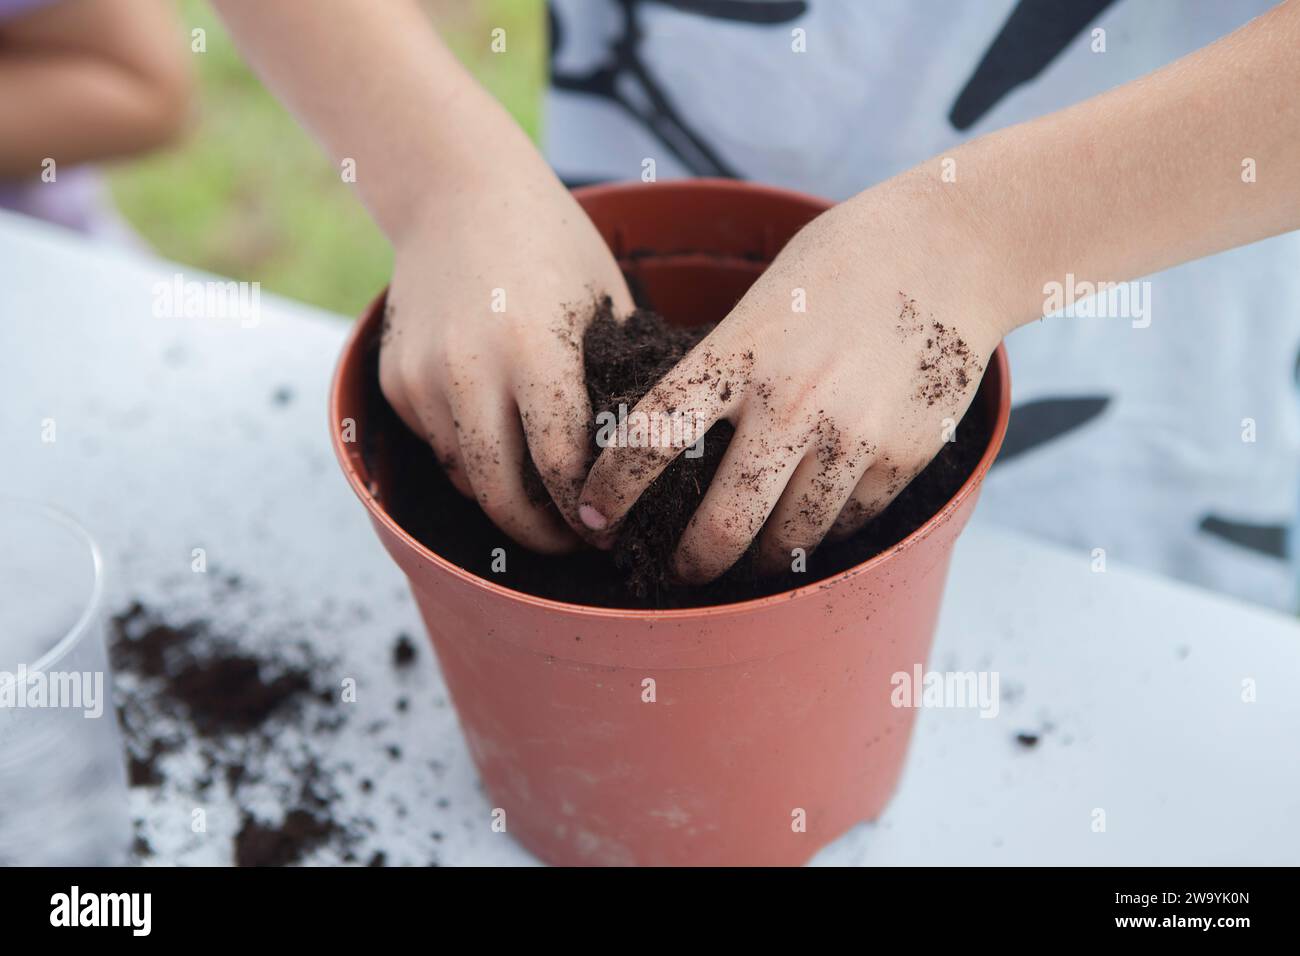 Grass heads workshop for children. Kid hands mixing seeds and compost Stock Photo